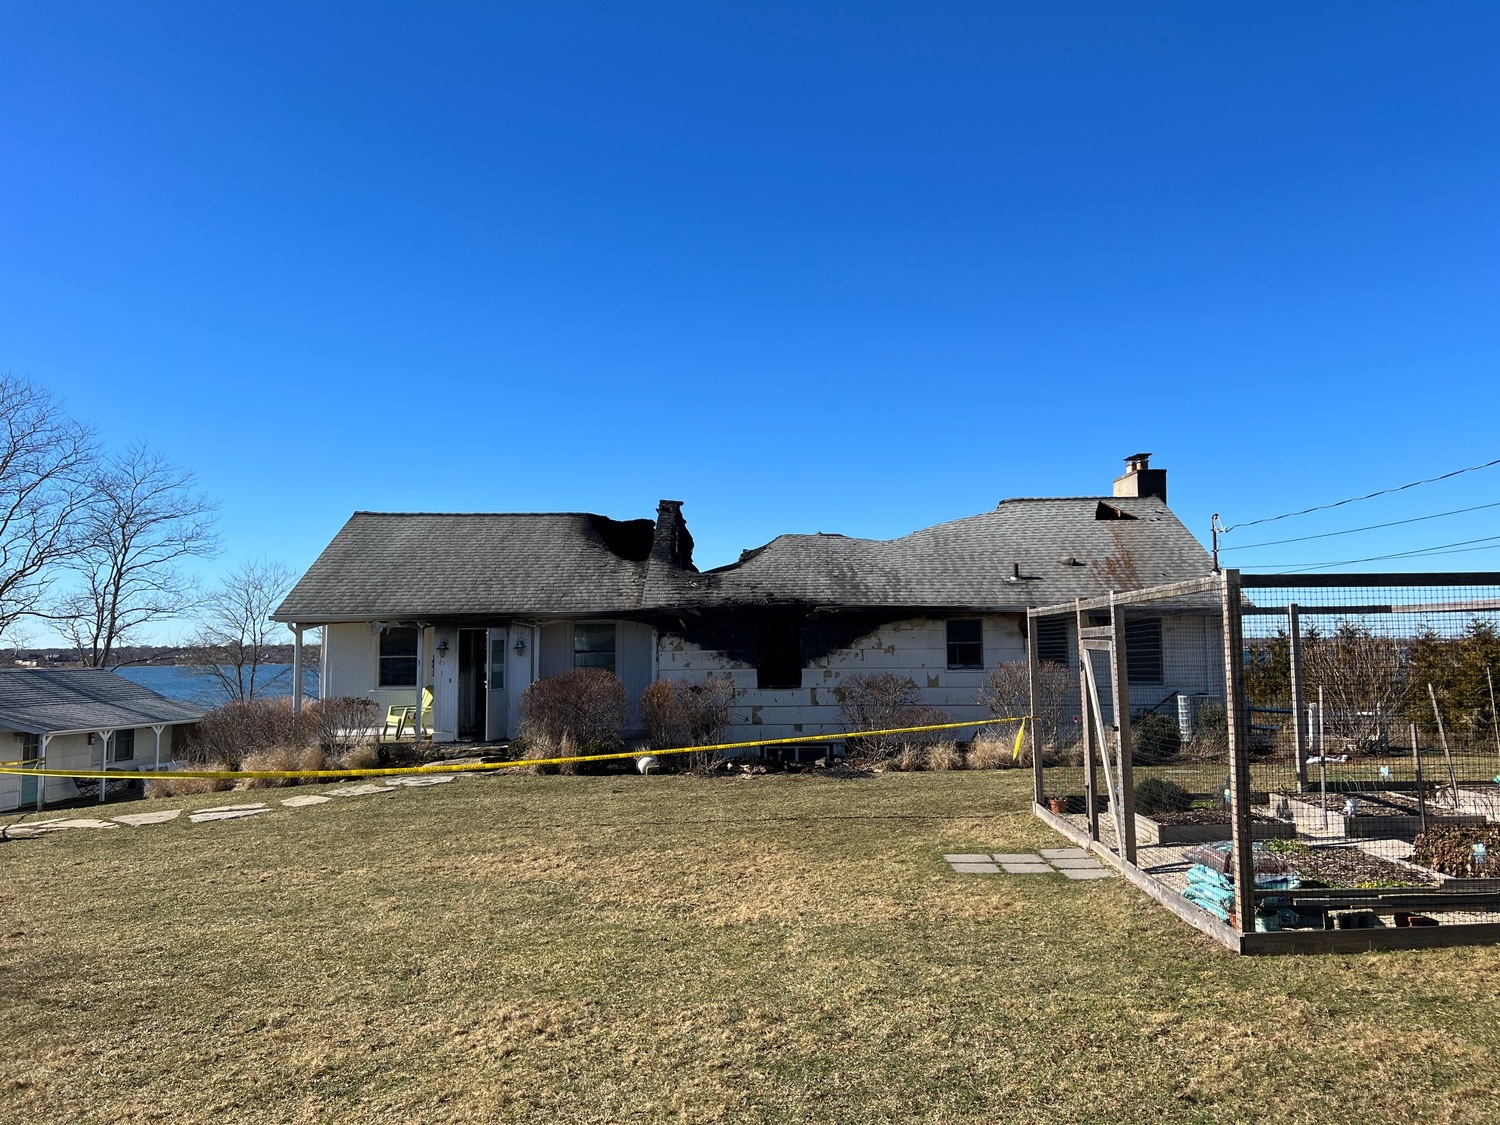 Montauk Fire Department firefighters battled a fire that badly damaged a waterfront cottage on East Lake Drive on Monday morning. Nobody was home when the fire broke out. DOUG KUNTZ